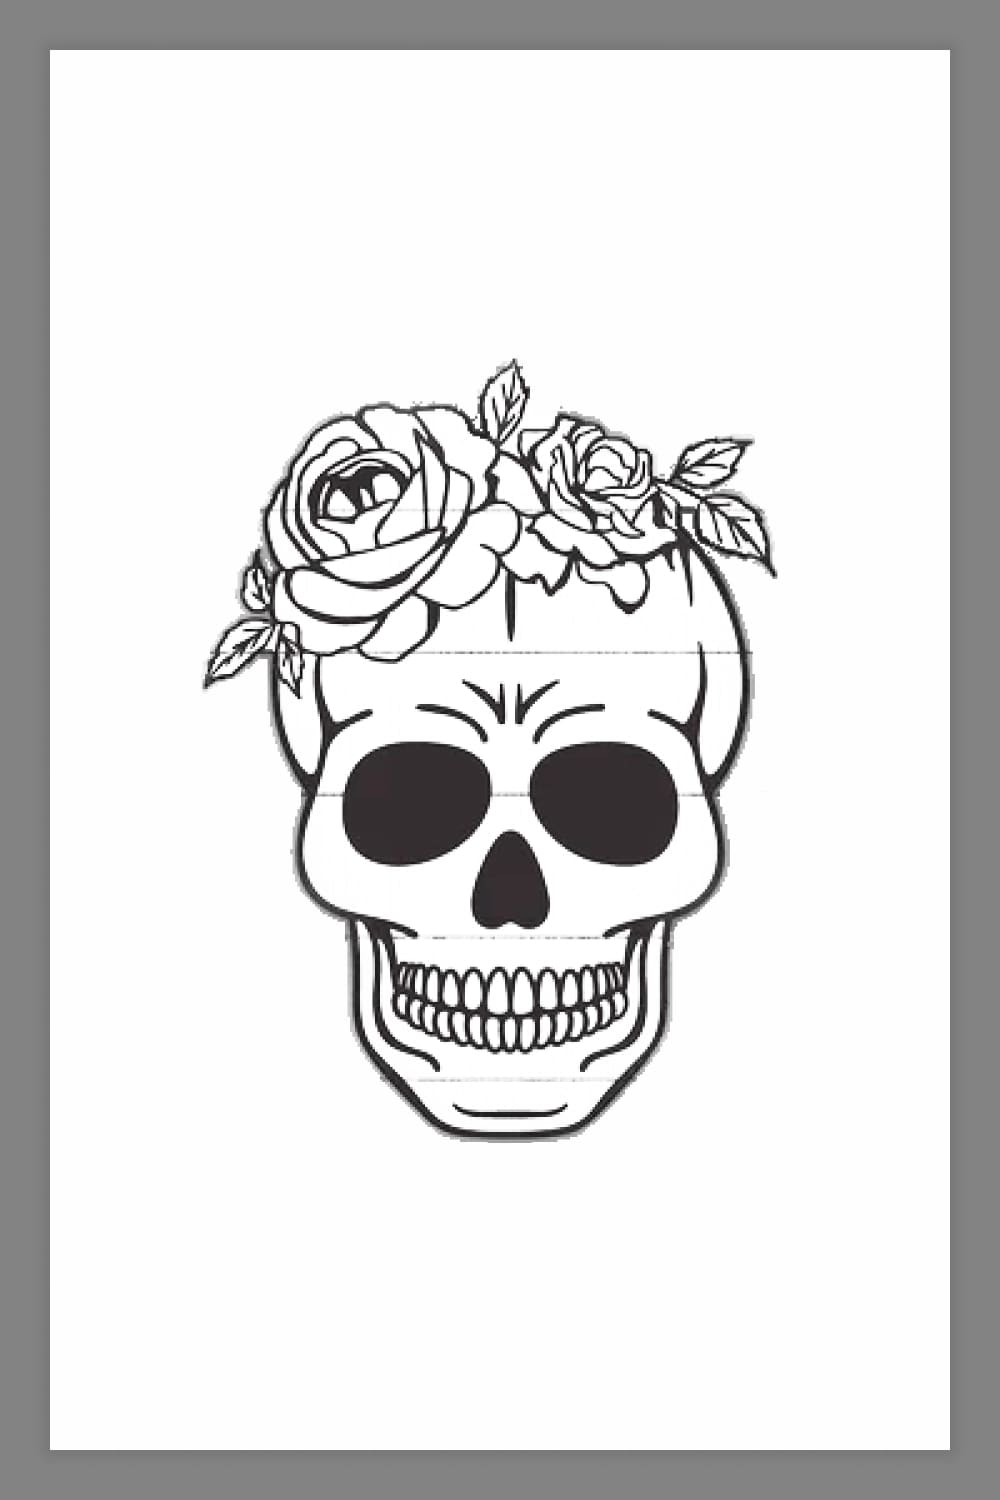 Skull with bouquets of roses on the forehead.